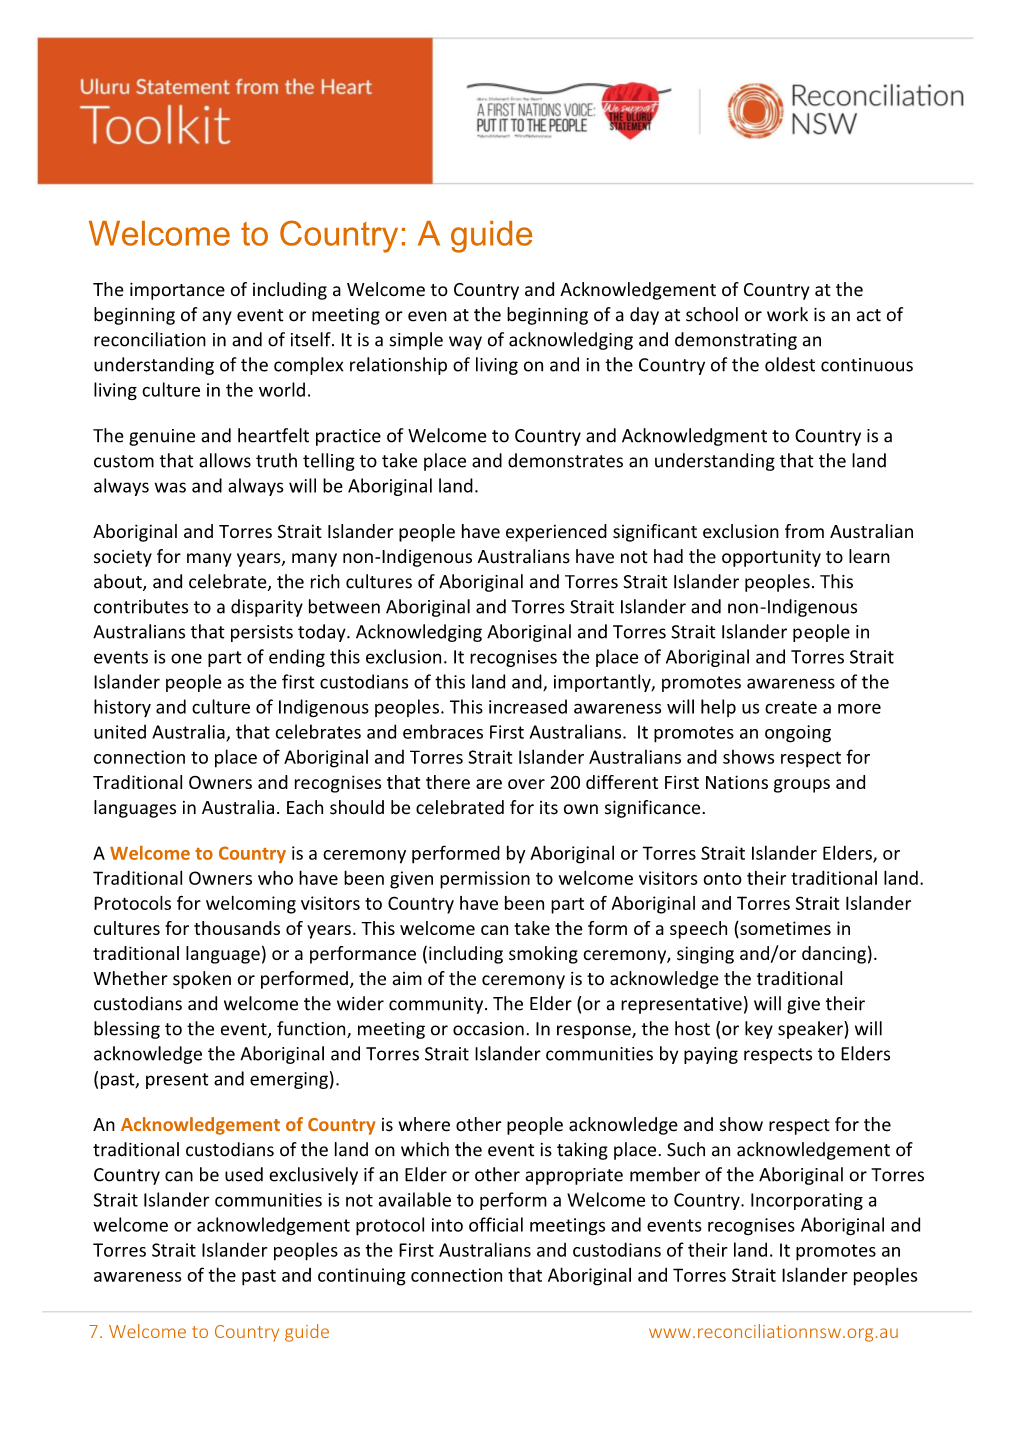 Welcome to Country: a Guide